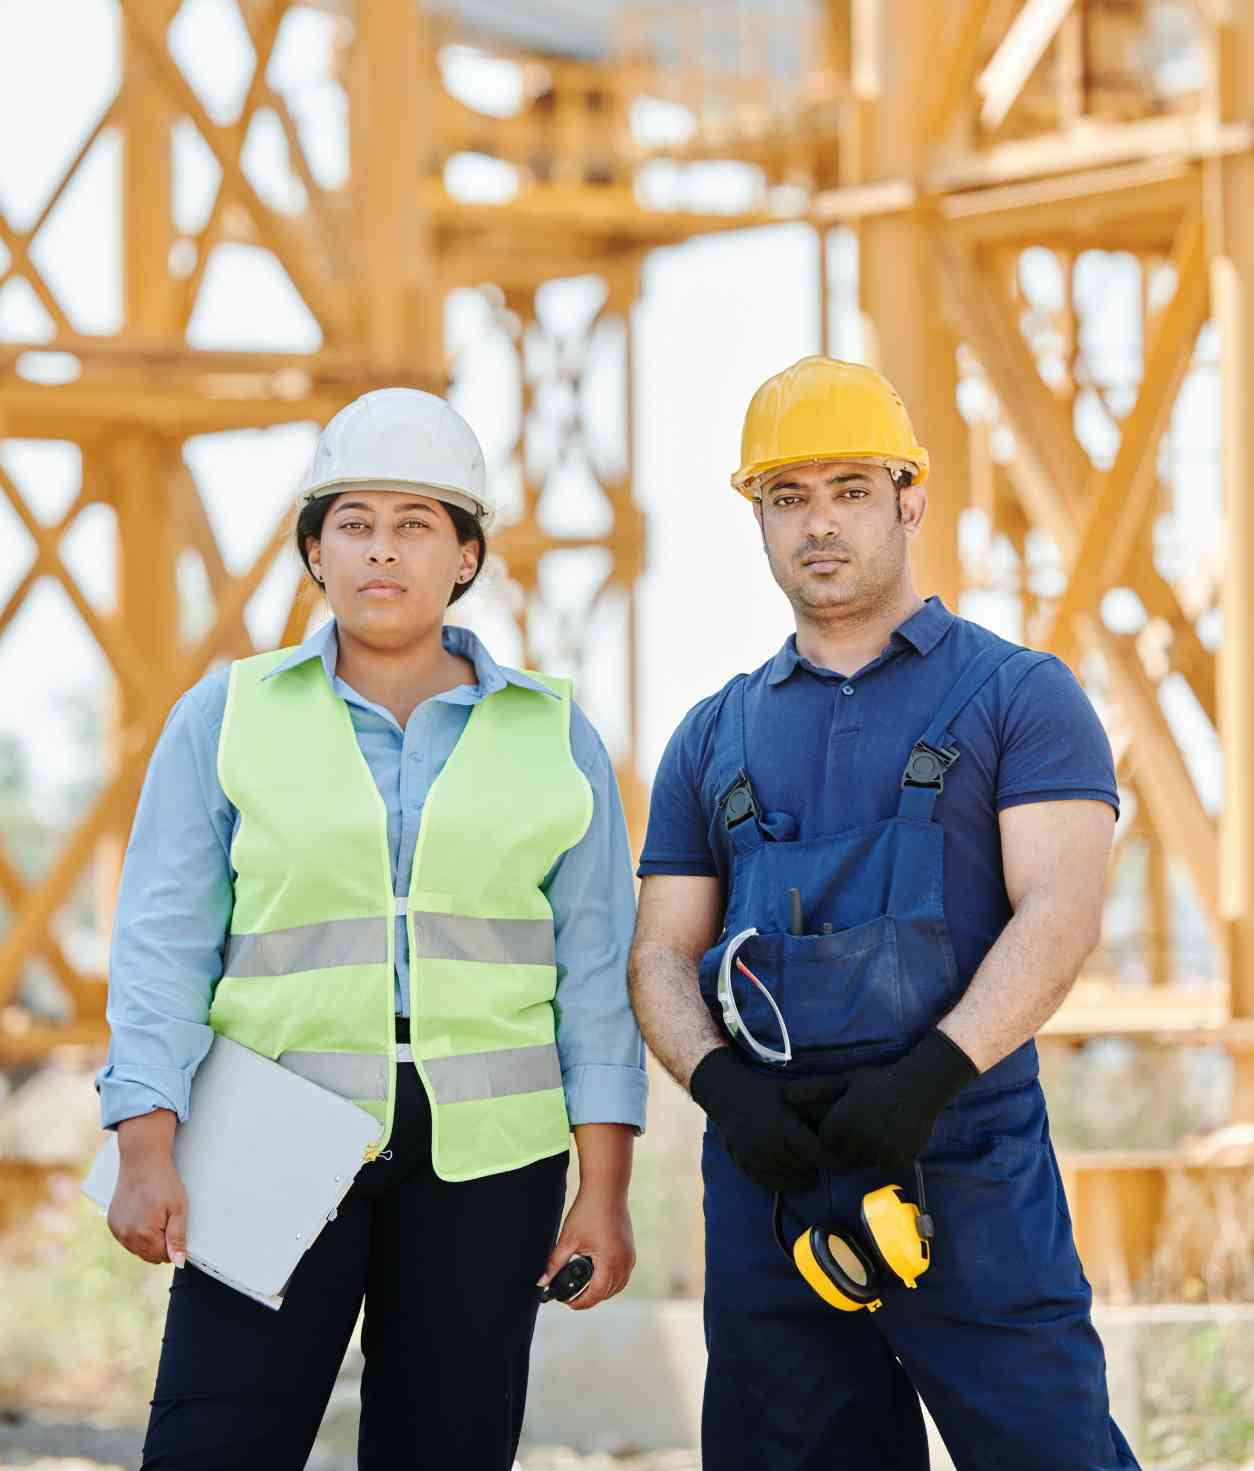 Two people in hard hats and safety vests standing next to a wooden structure.